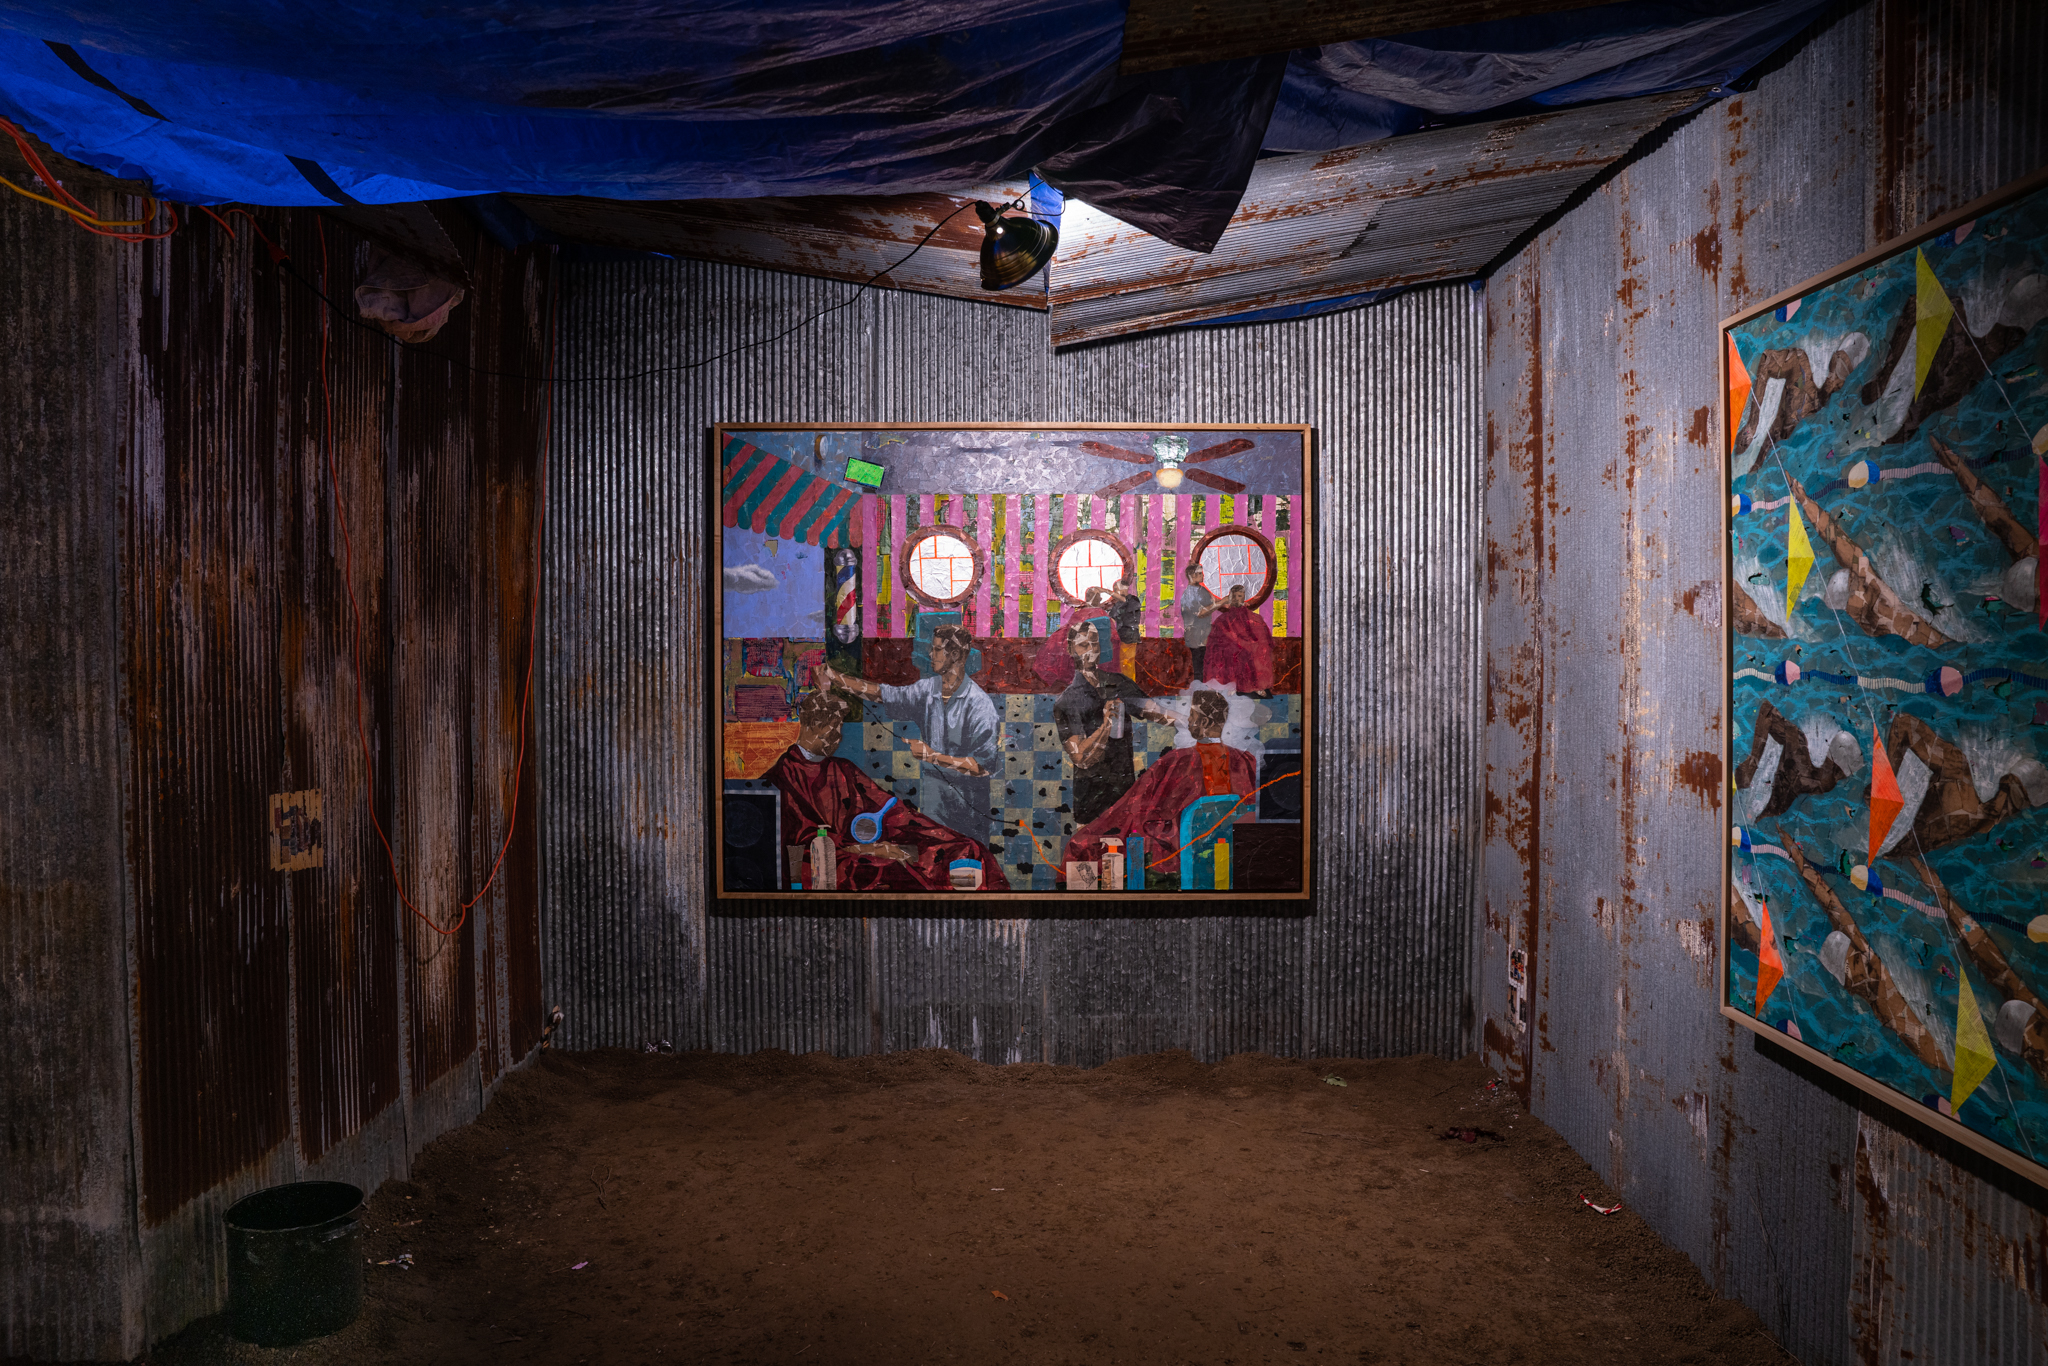 A photo of Derek Fordjour's exhibit SHELTER, displaying sheets of corrugated metal that surround the displayed paintings.